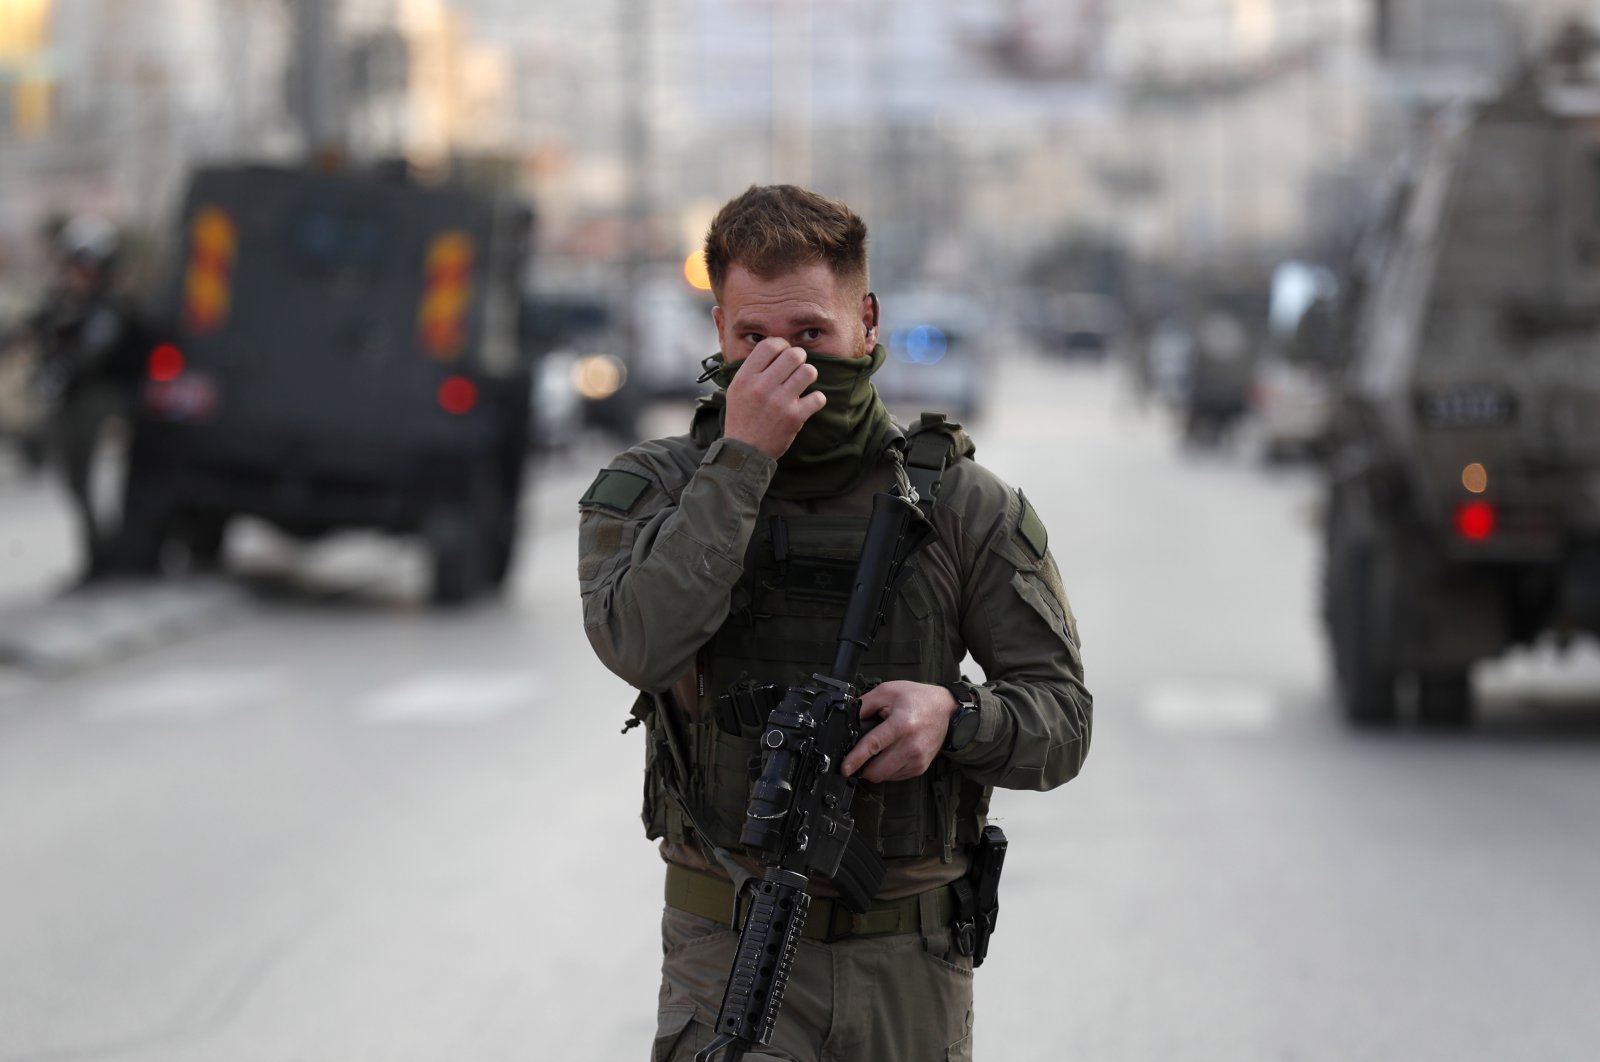 An armed Israeli soldier stands near the scene of a shooting attack, Hawara, occupied West Bank, Palestine, Feb. 26, 2023. (EPA Photo)